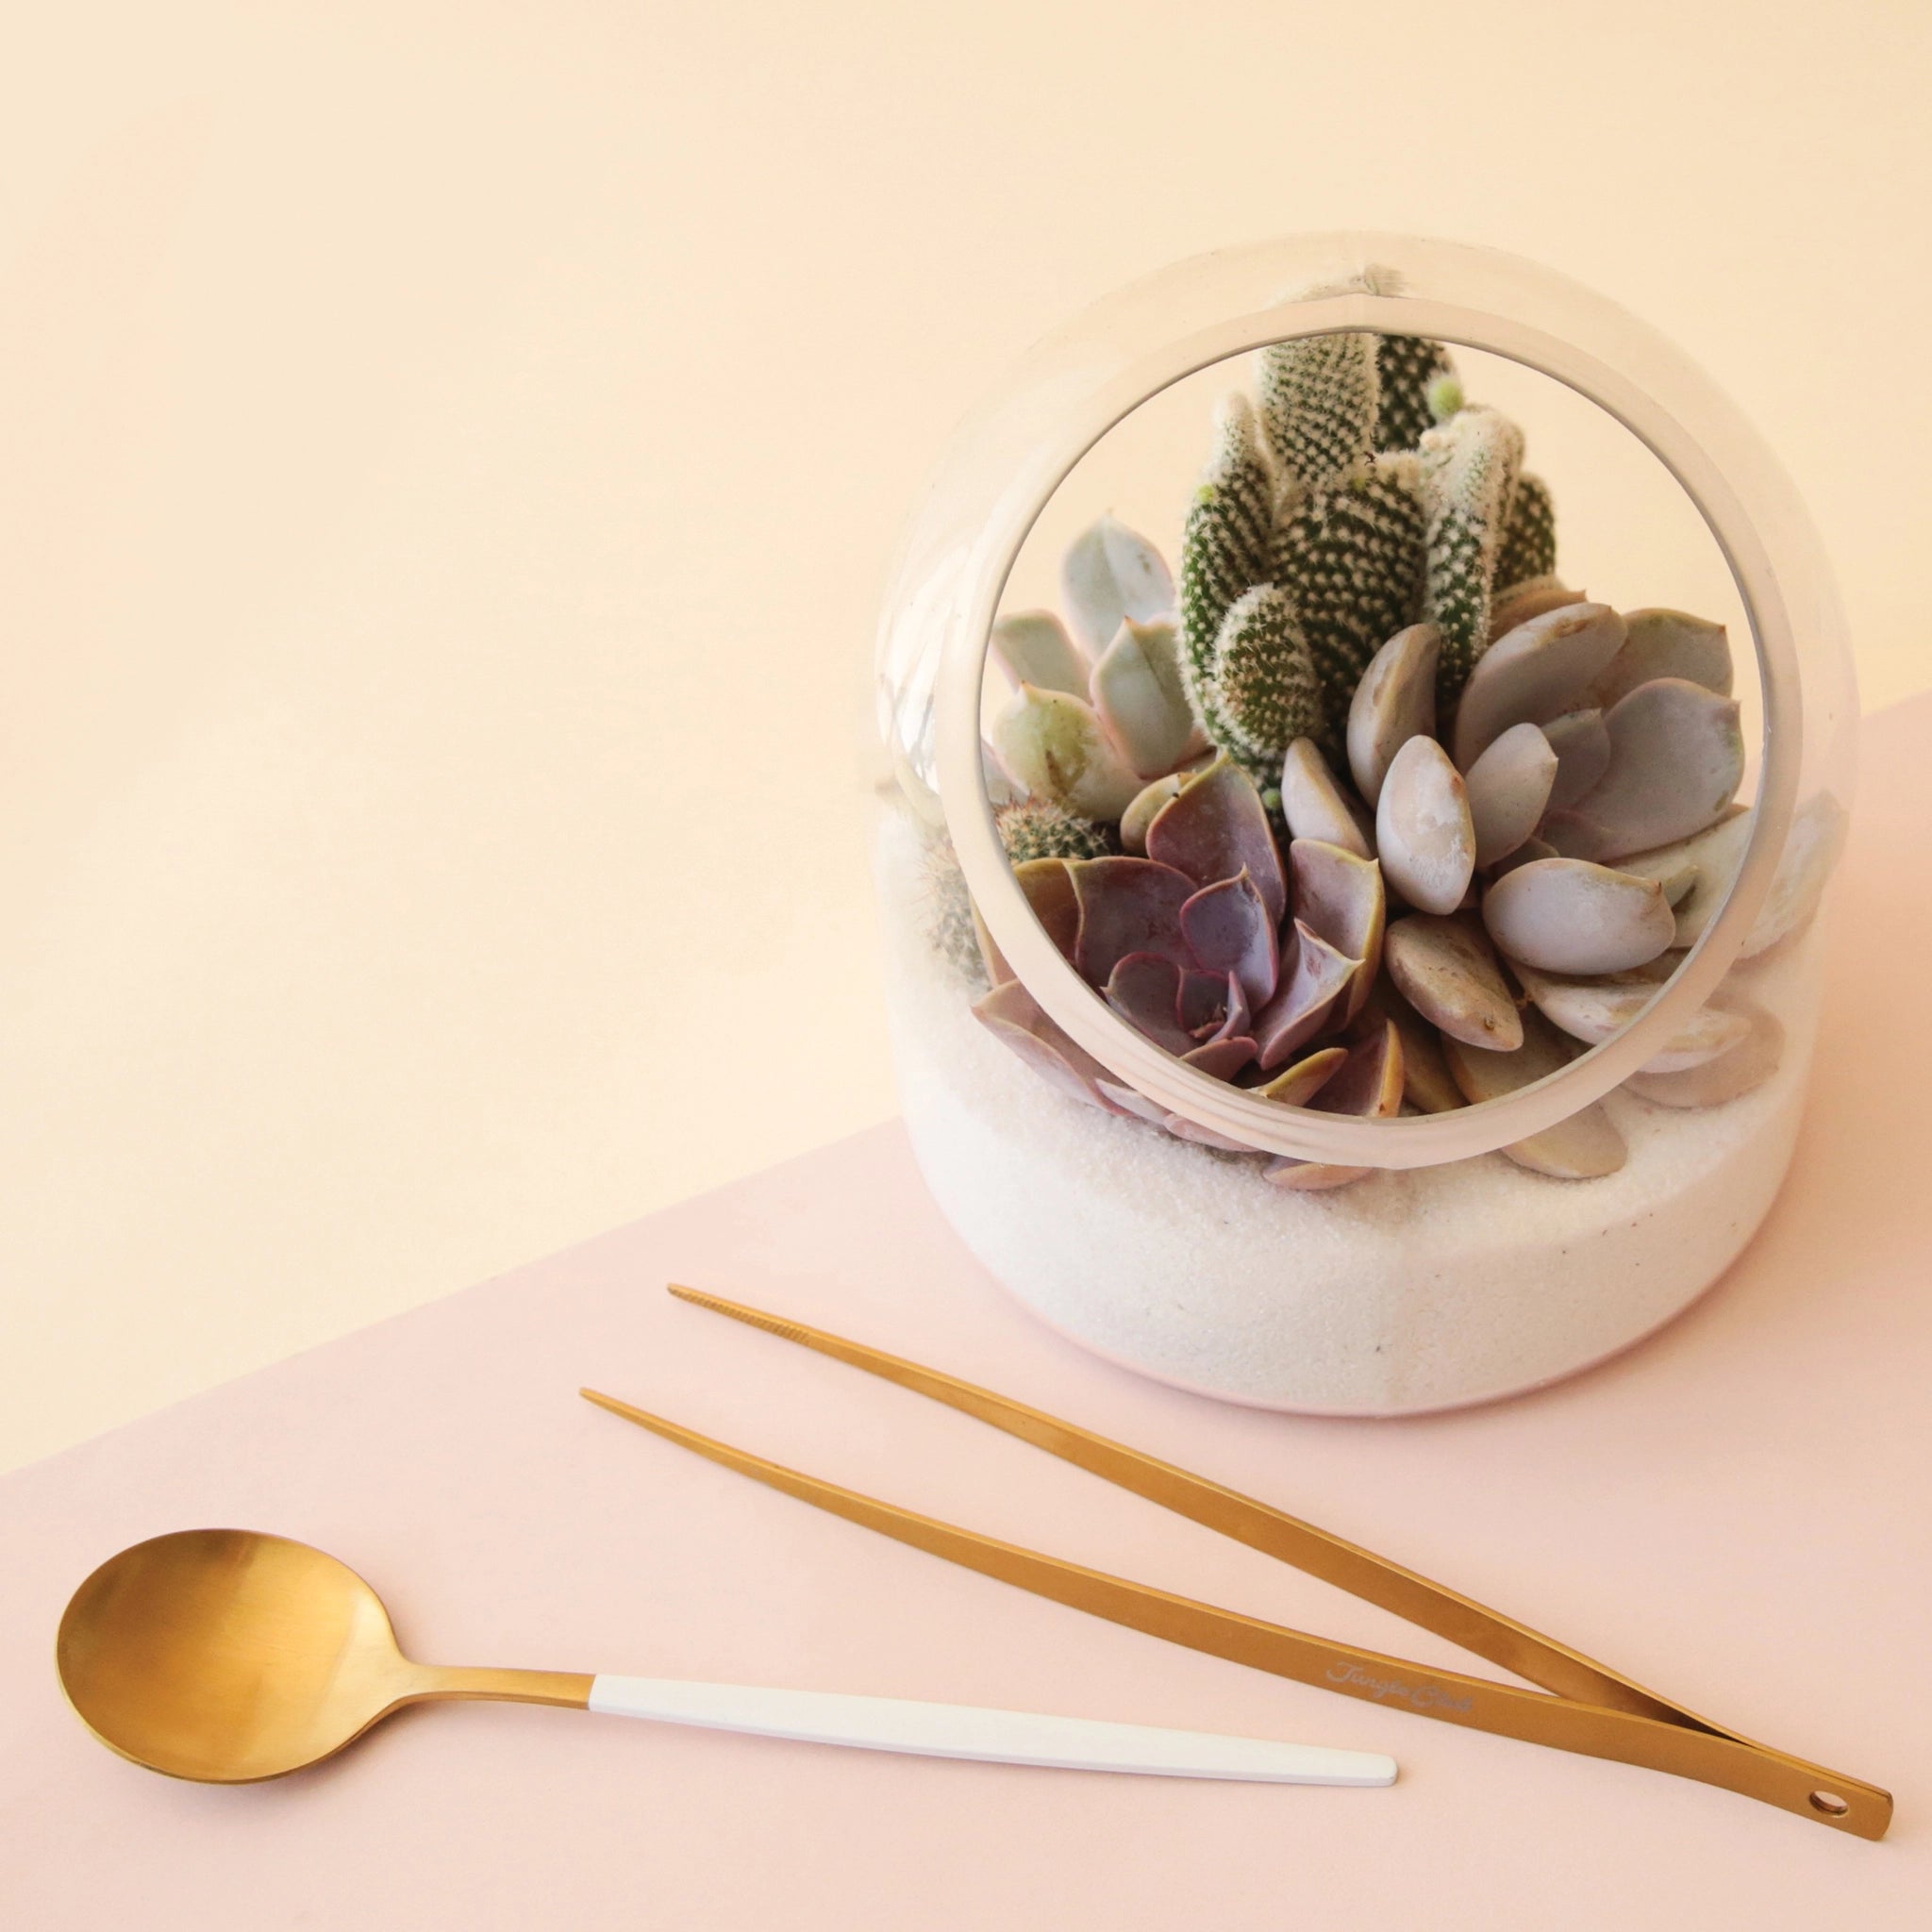 A glass terrarium with a flat bottom, and a circle opening at the front and filled here with a succulent arrangement.